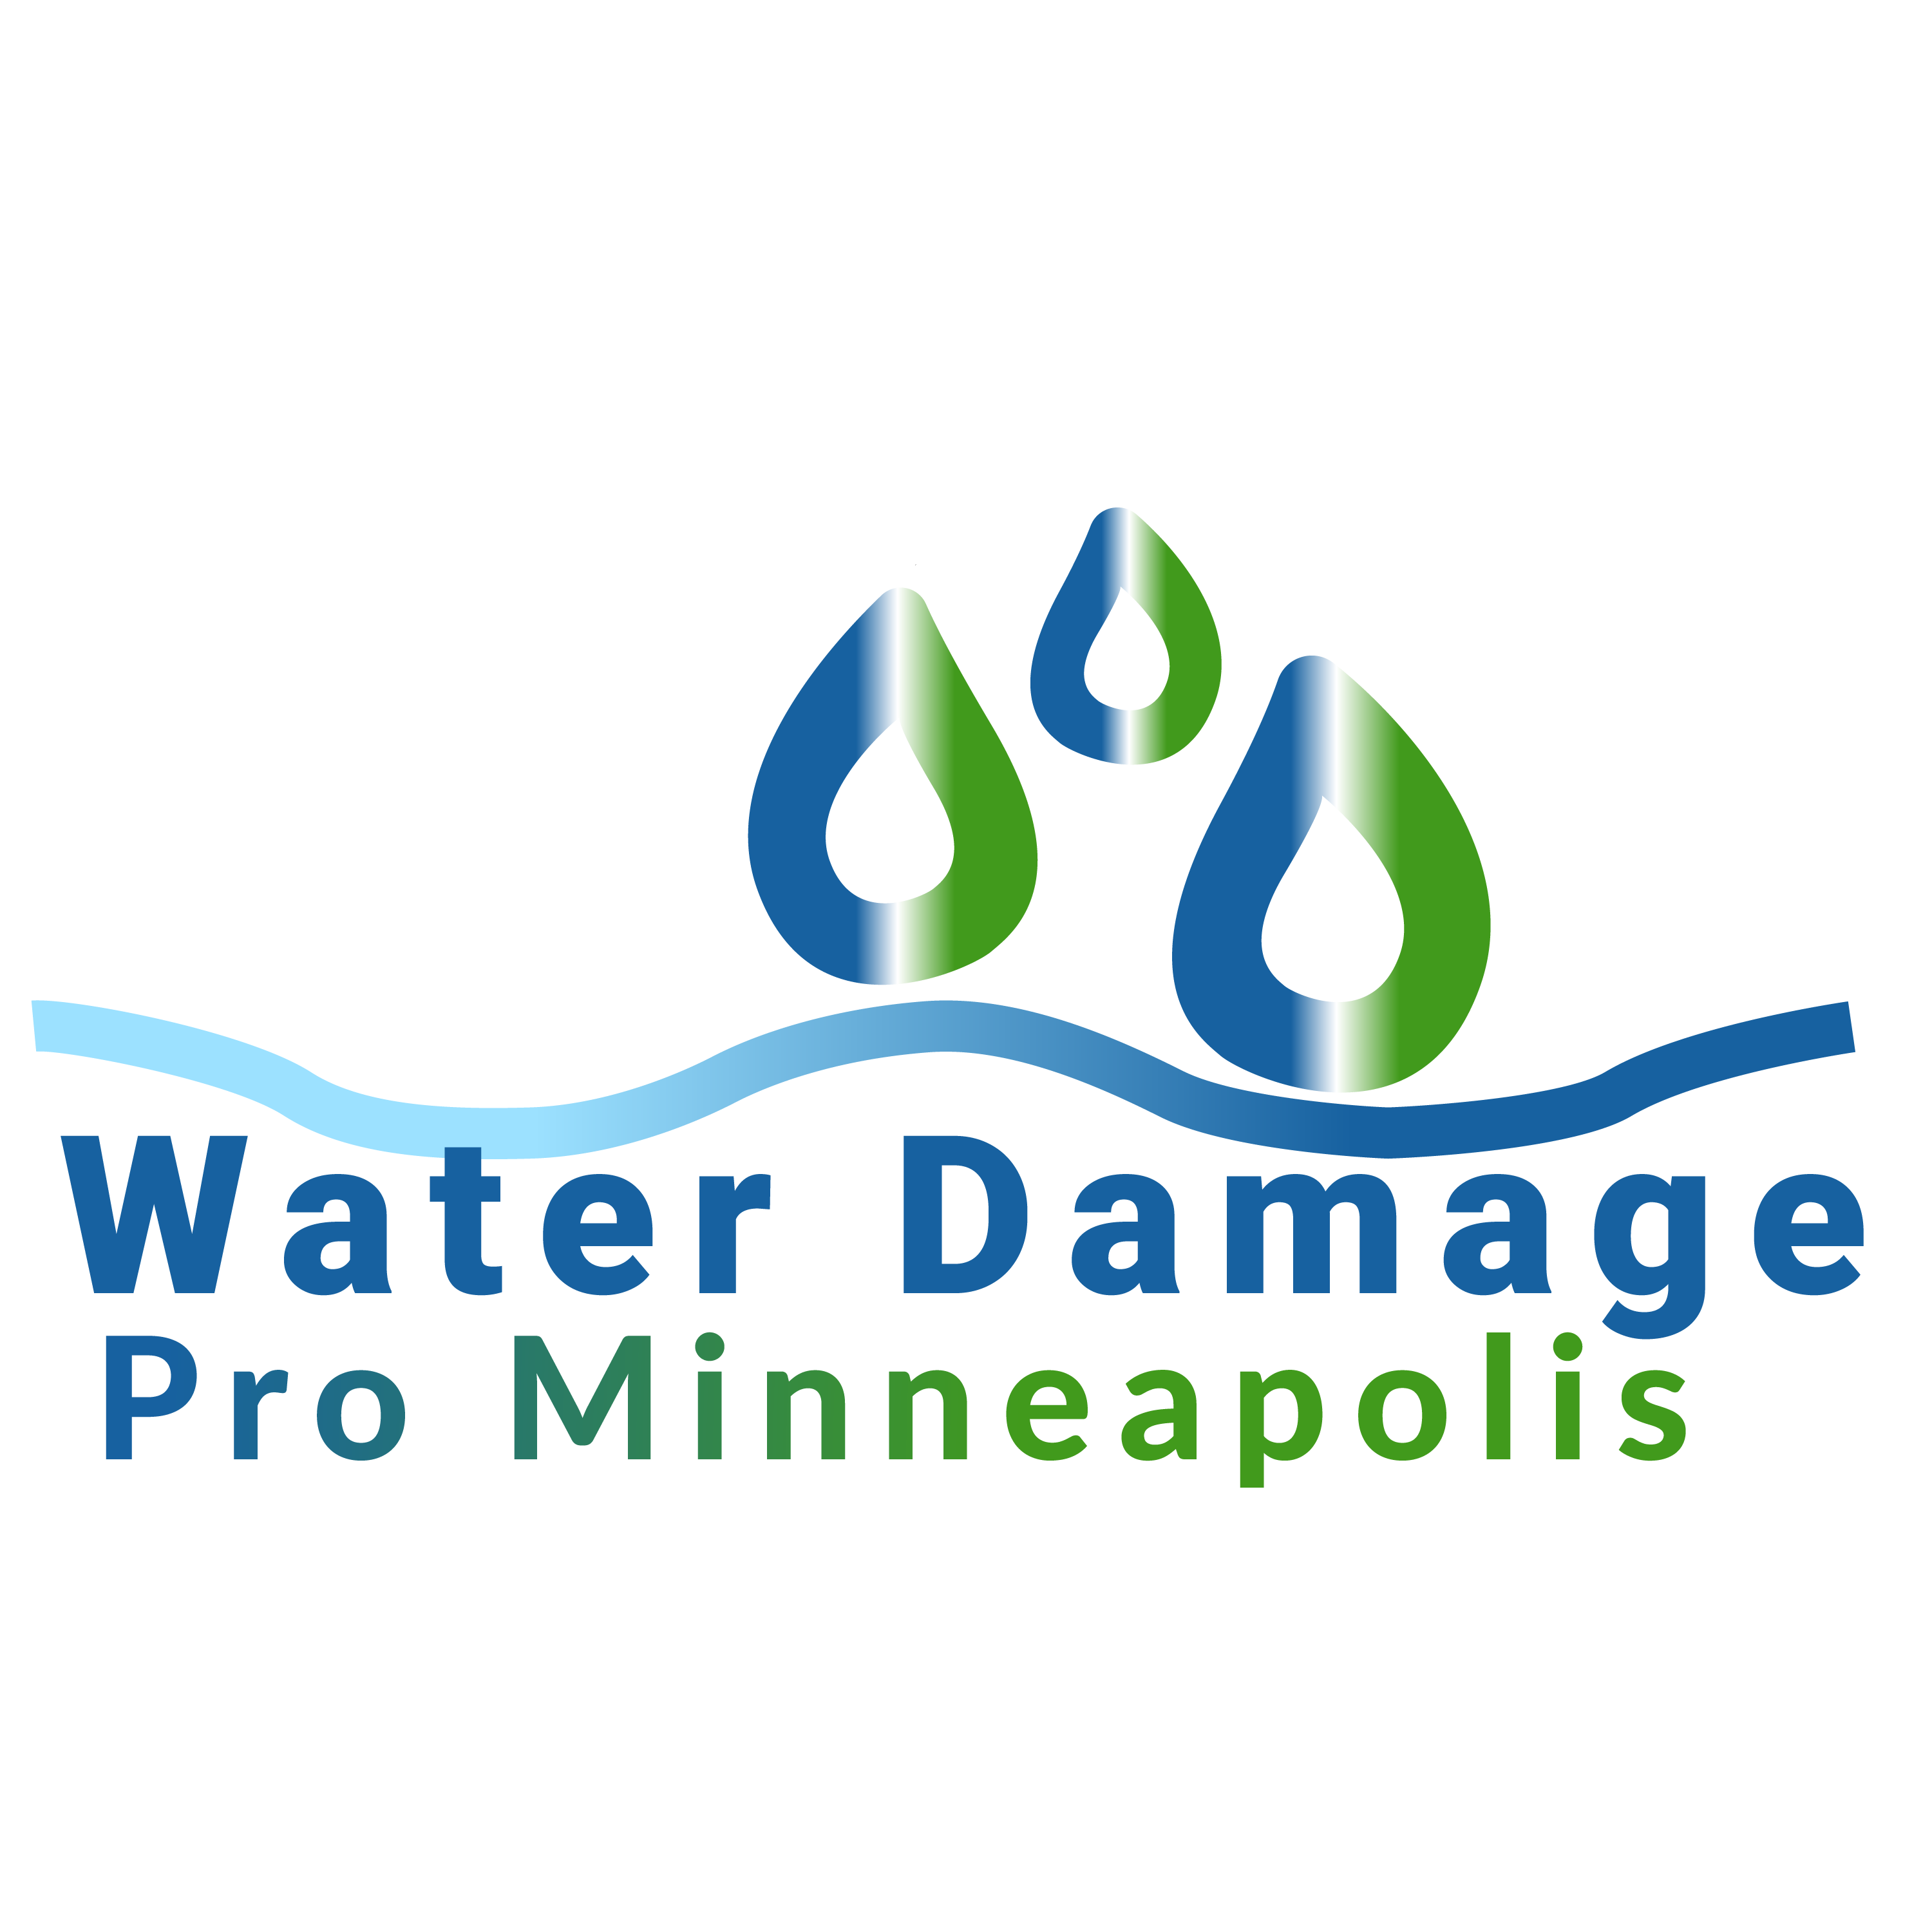 Water Damage Pro Minneapolis Announces Corona Virus Cleaning Services 